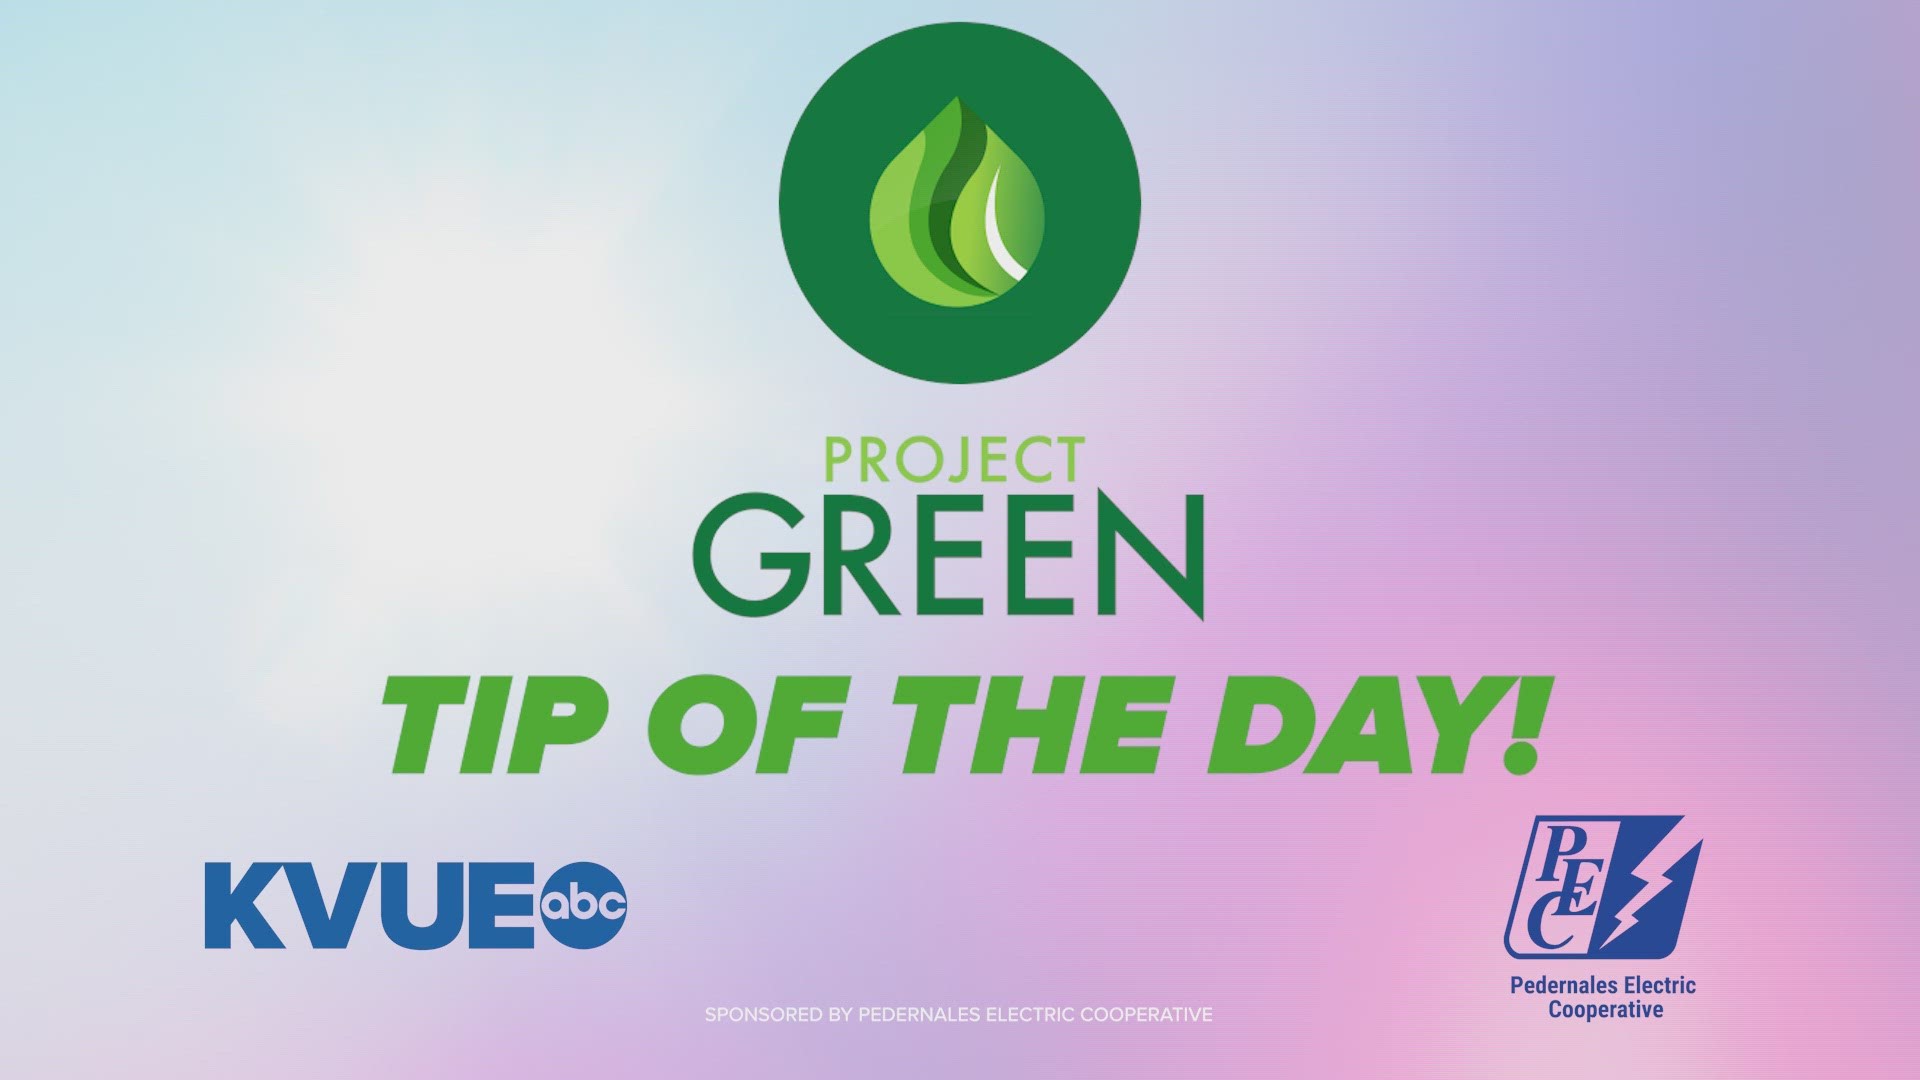 KVUE and PEC have you covered all summer long with Project Green. Sponsored Content by Pedernales Electric Coop.